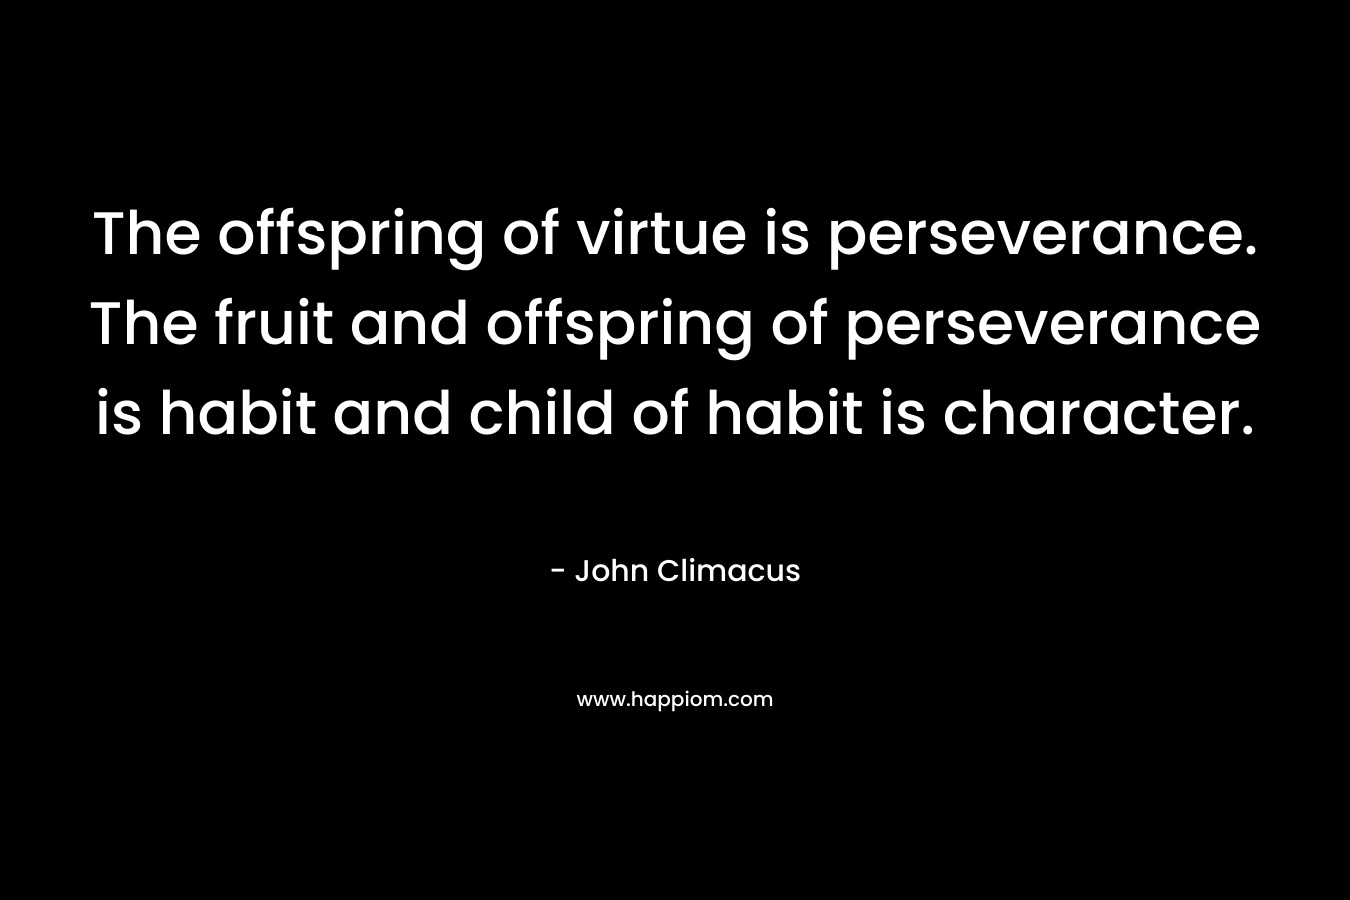 The offspring of virtue is perseverance. The fruit and offspring of perseverance is habit and child of habit is character.